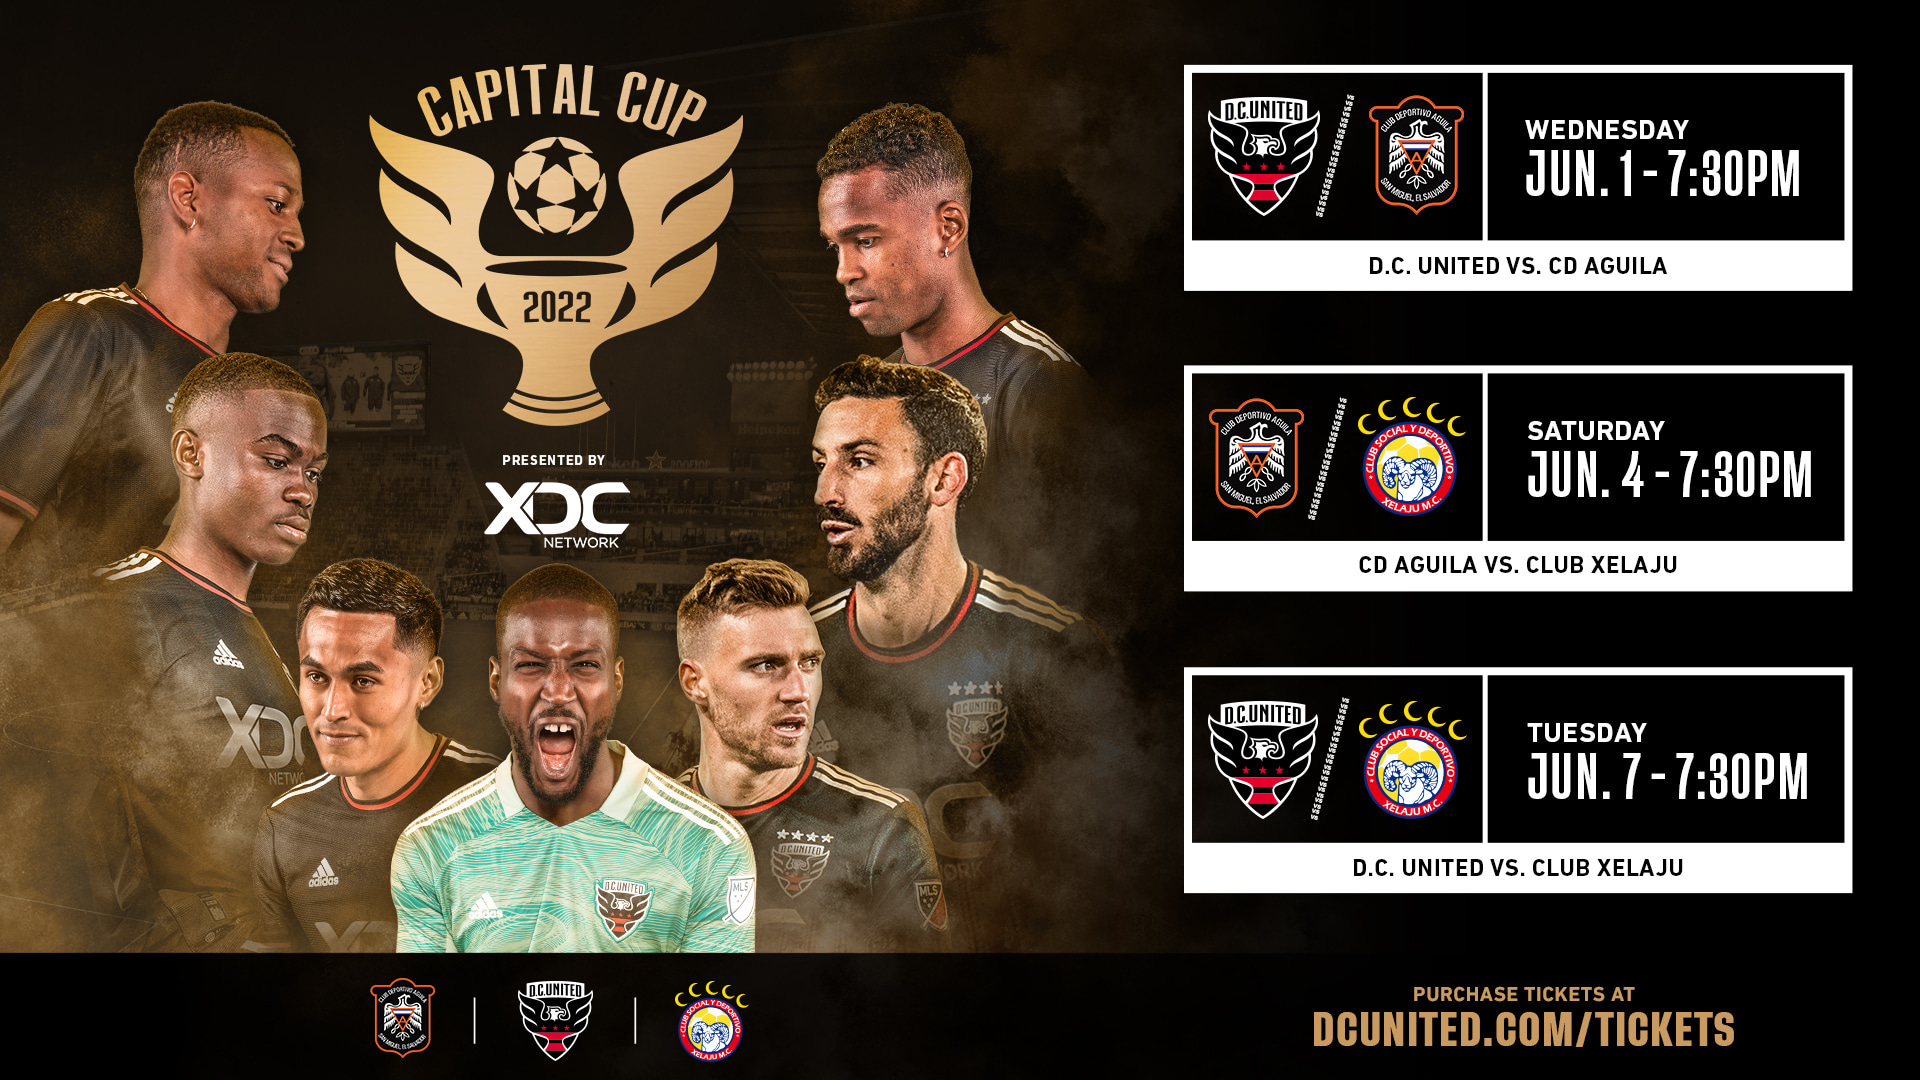 Audi Field to Host Second Annual Capital Cup Presented by XDC Network ...